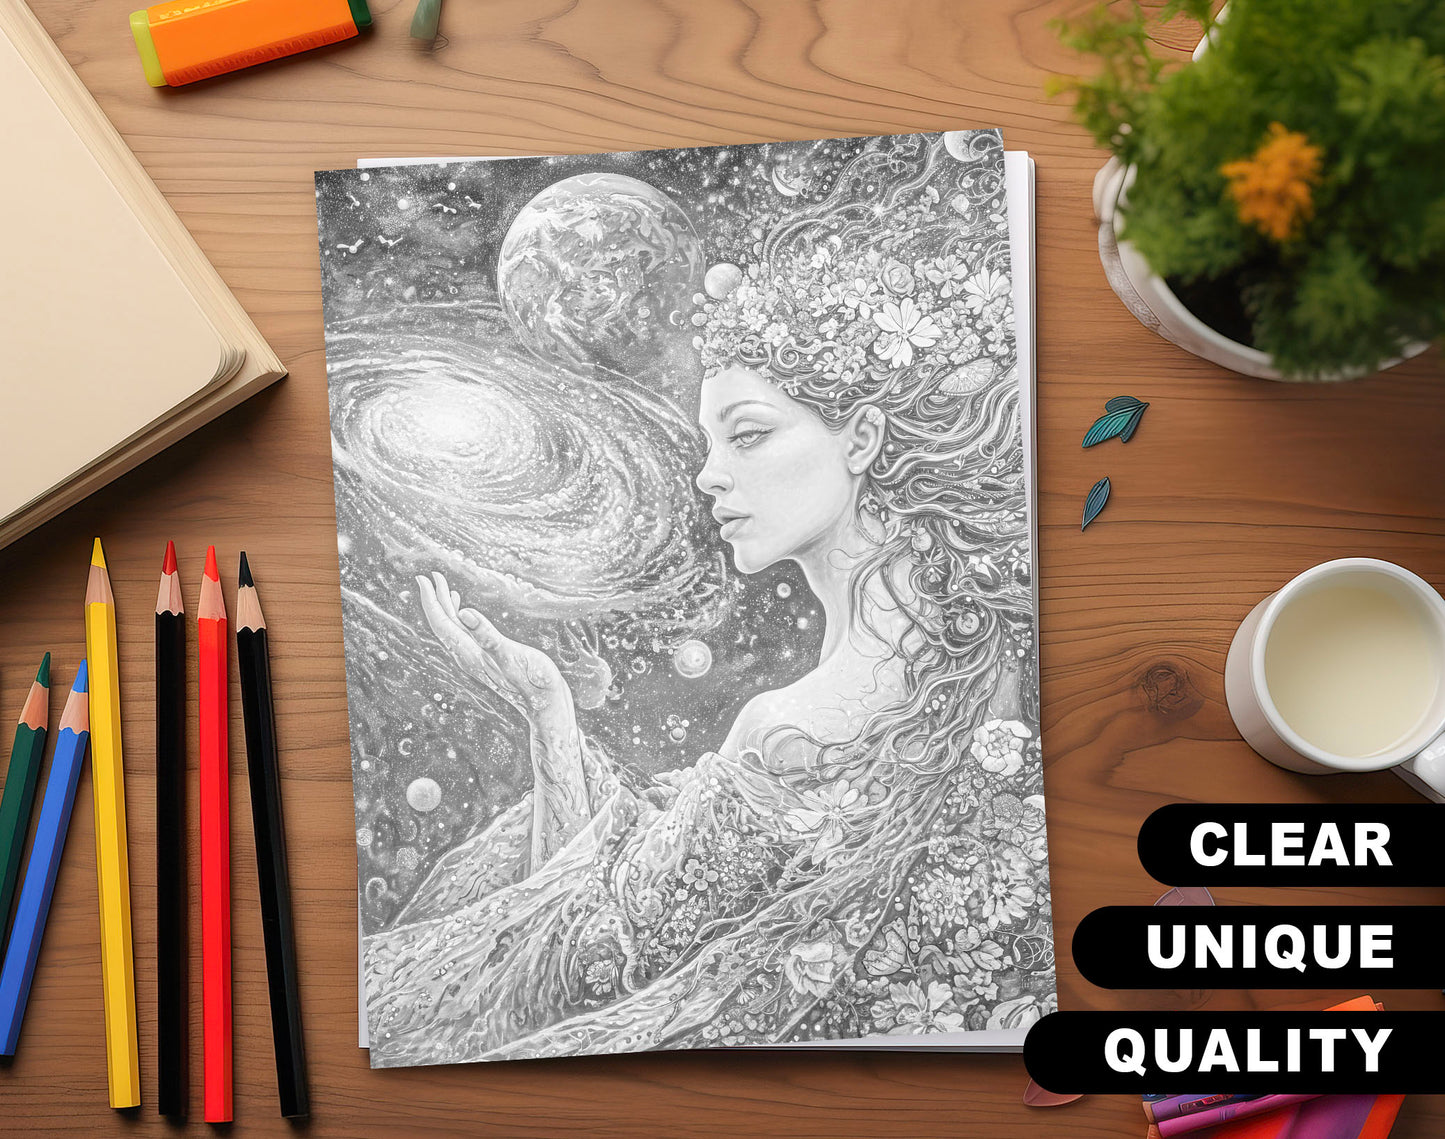 50 Mother Of The Earth Grayscale Coloring Pages - Instant Download - Printable Dark/Light